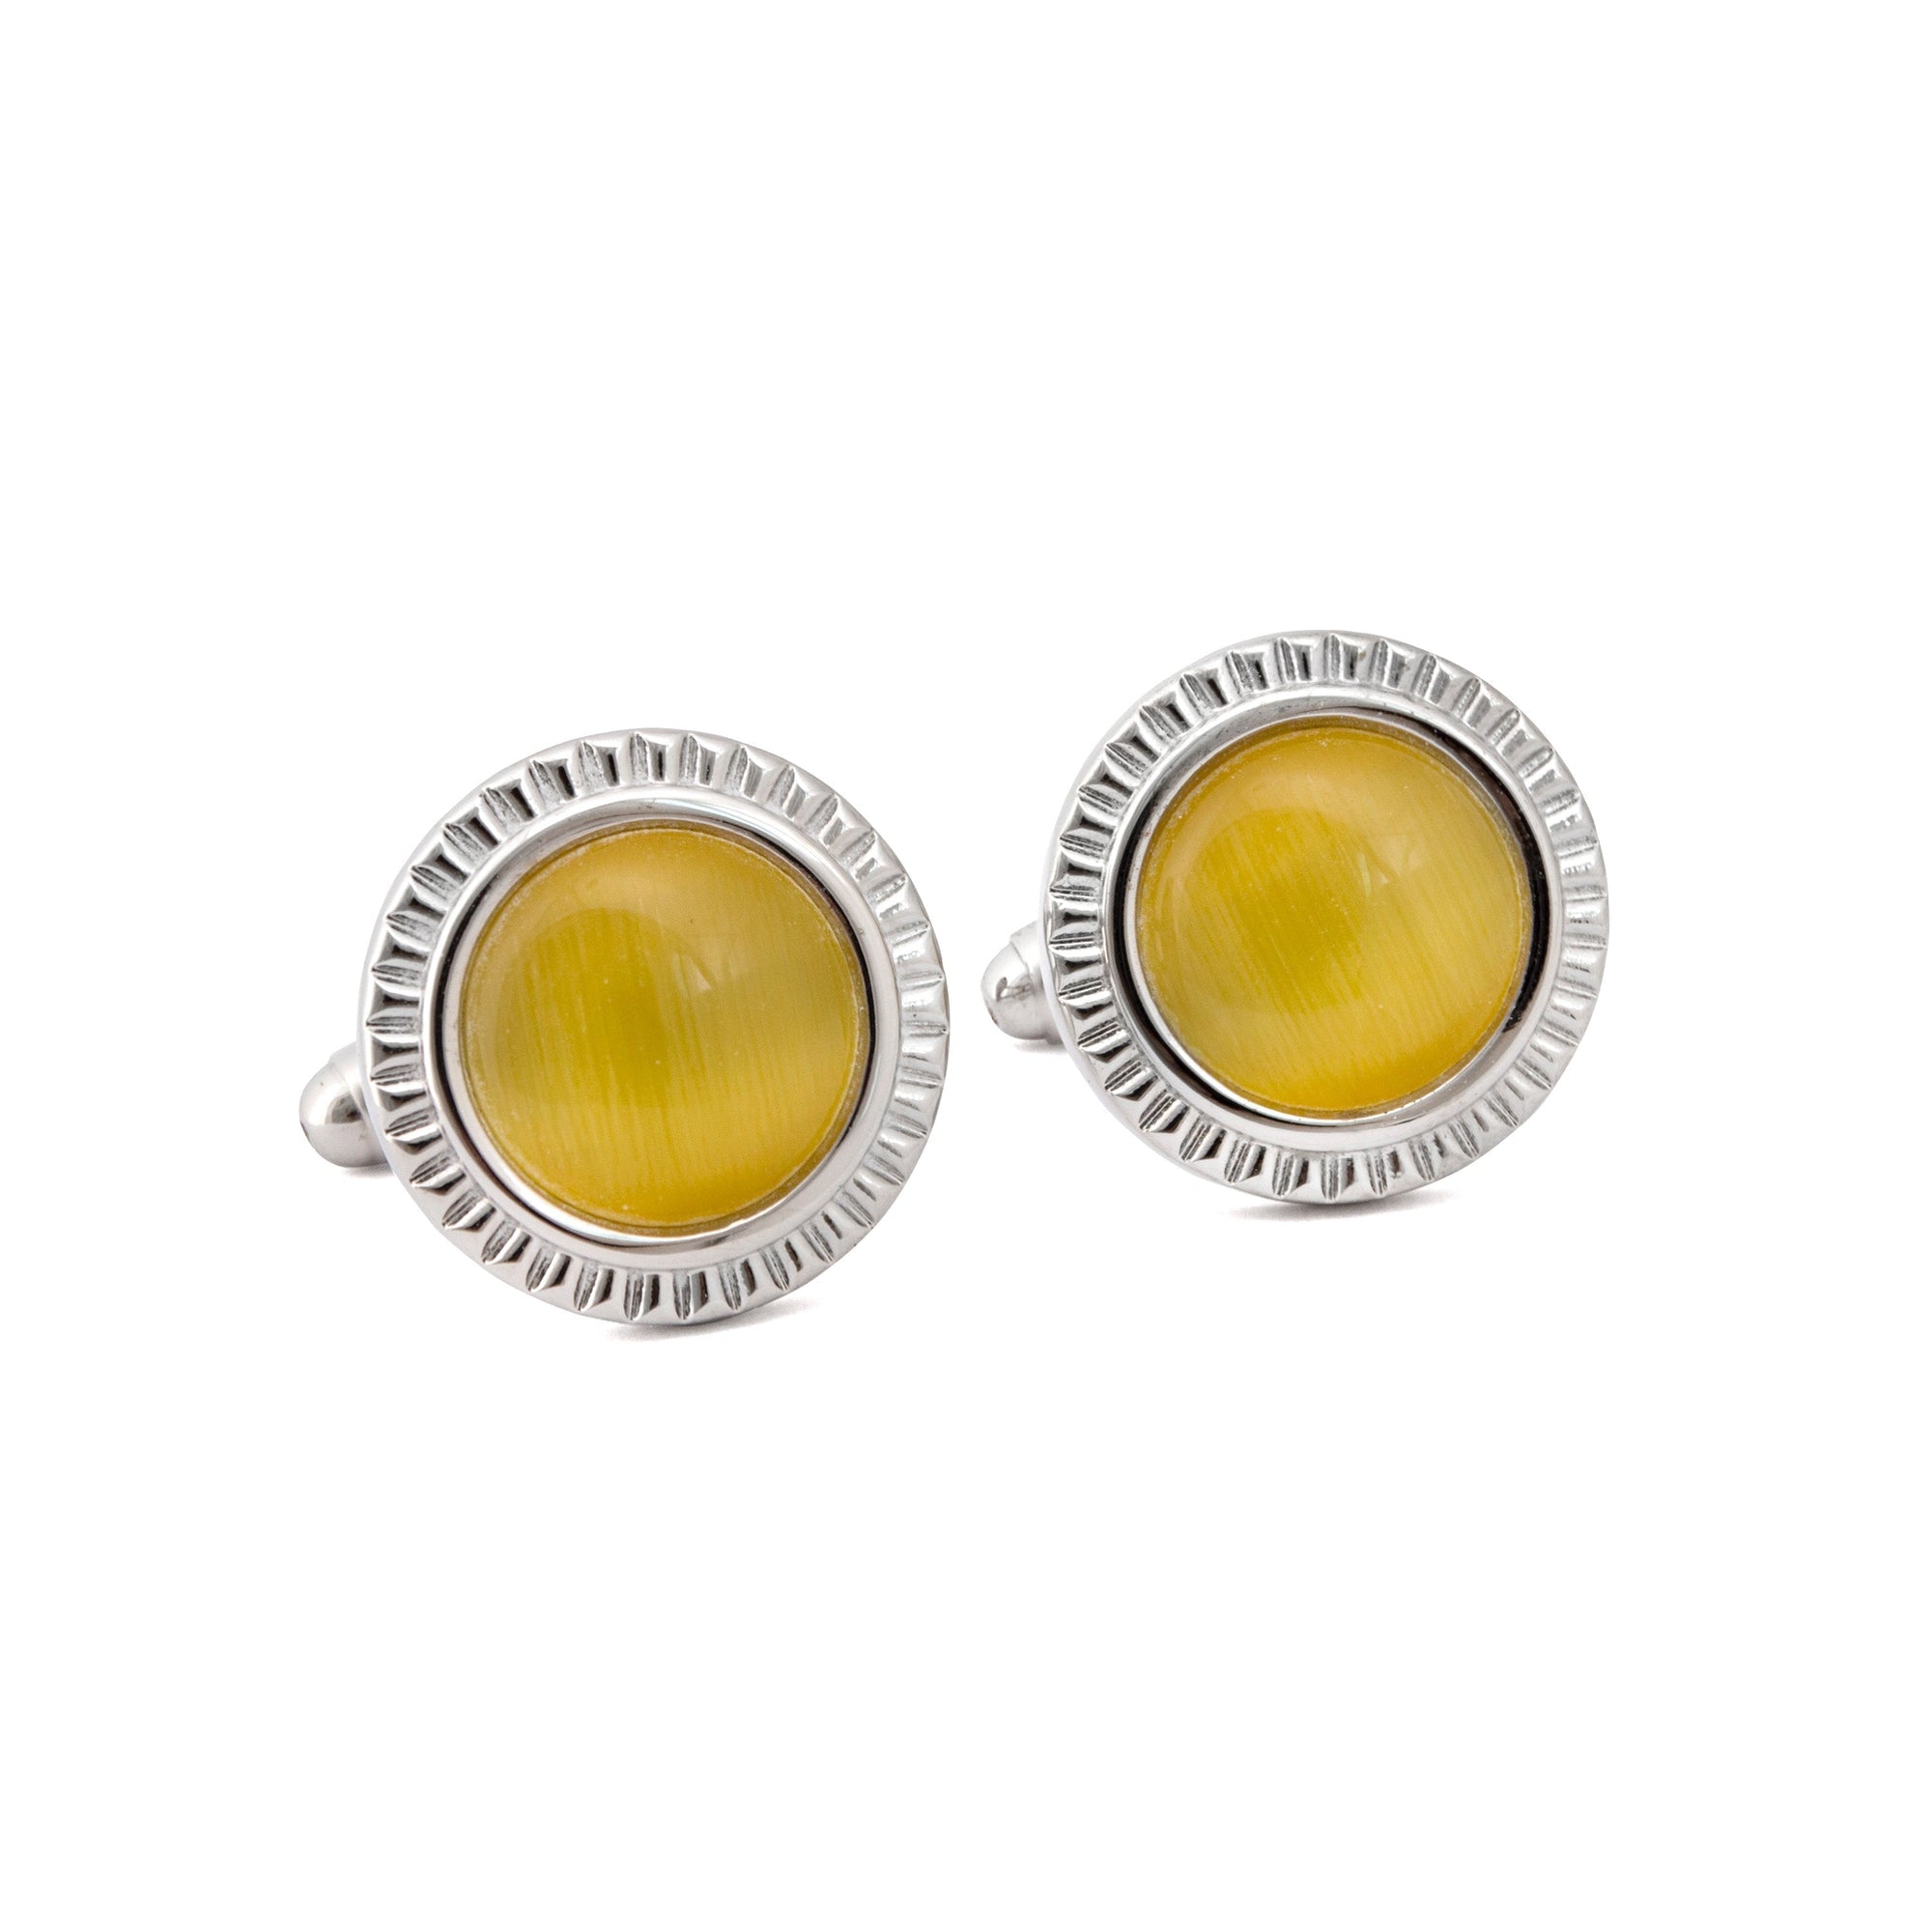 MarZthomson Faceted Round Bezel with Fibre Optic Glass Cufflink in Yellow-Cufflinks.com.sg